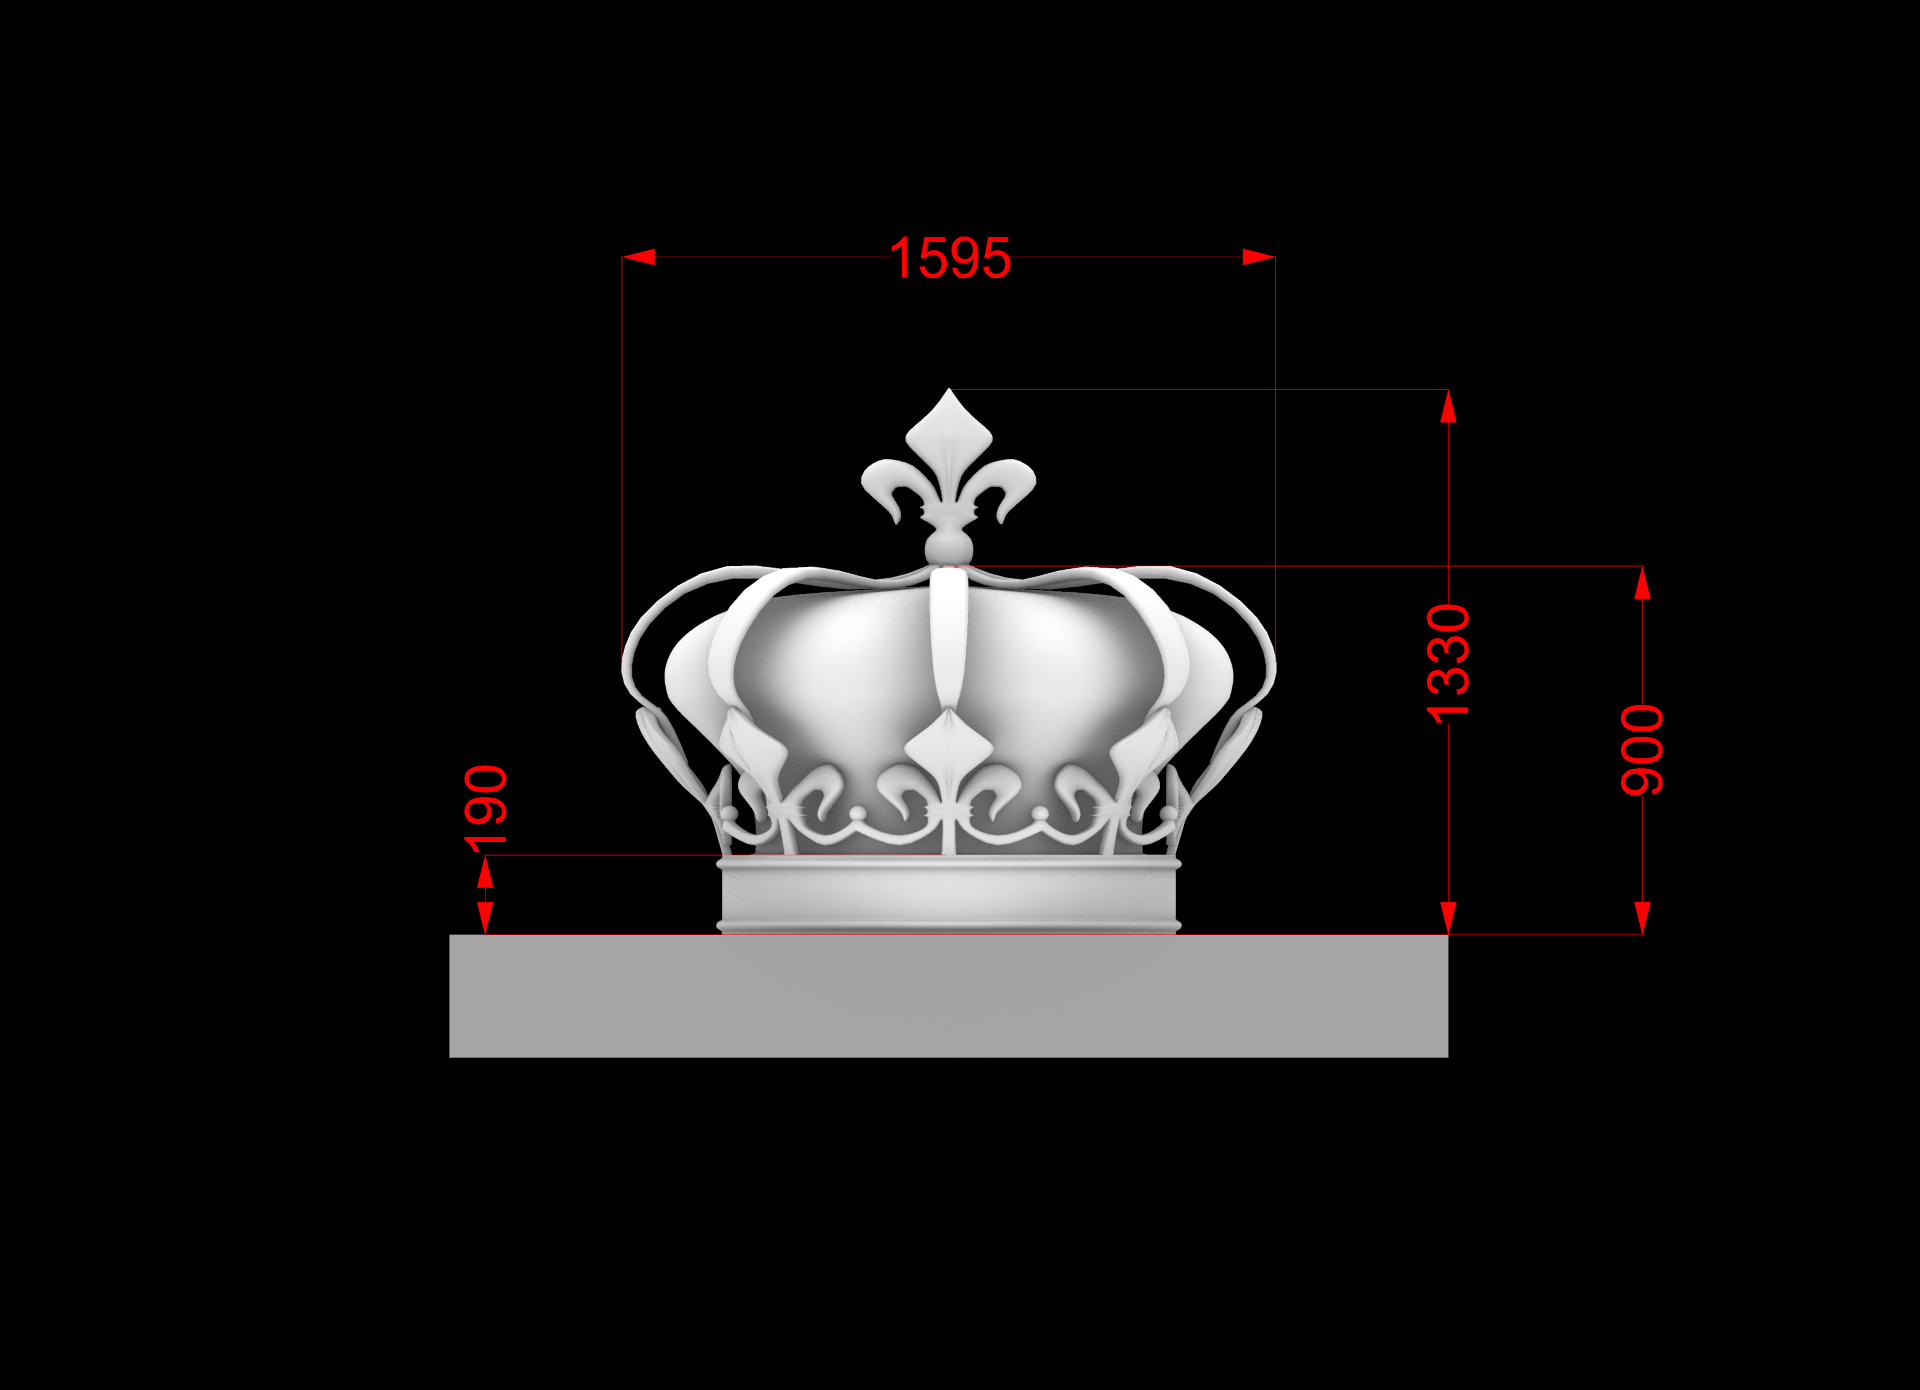 giant crown to be installed outside buckingham palace - here's what it will look like